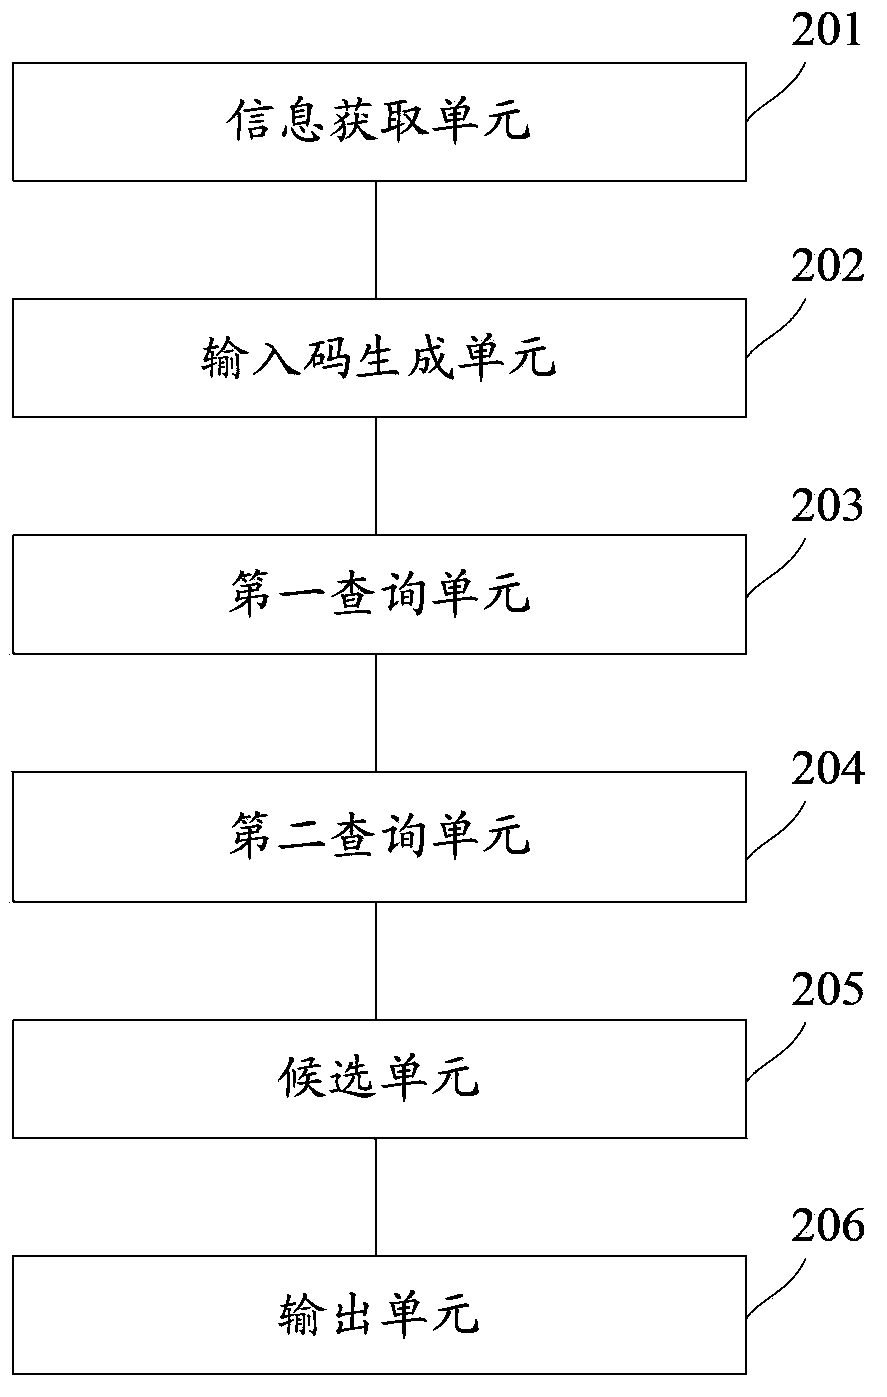 Deformed character input method and system